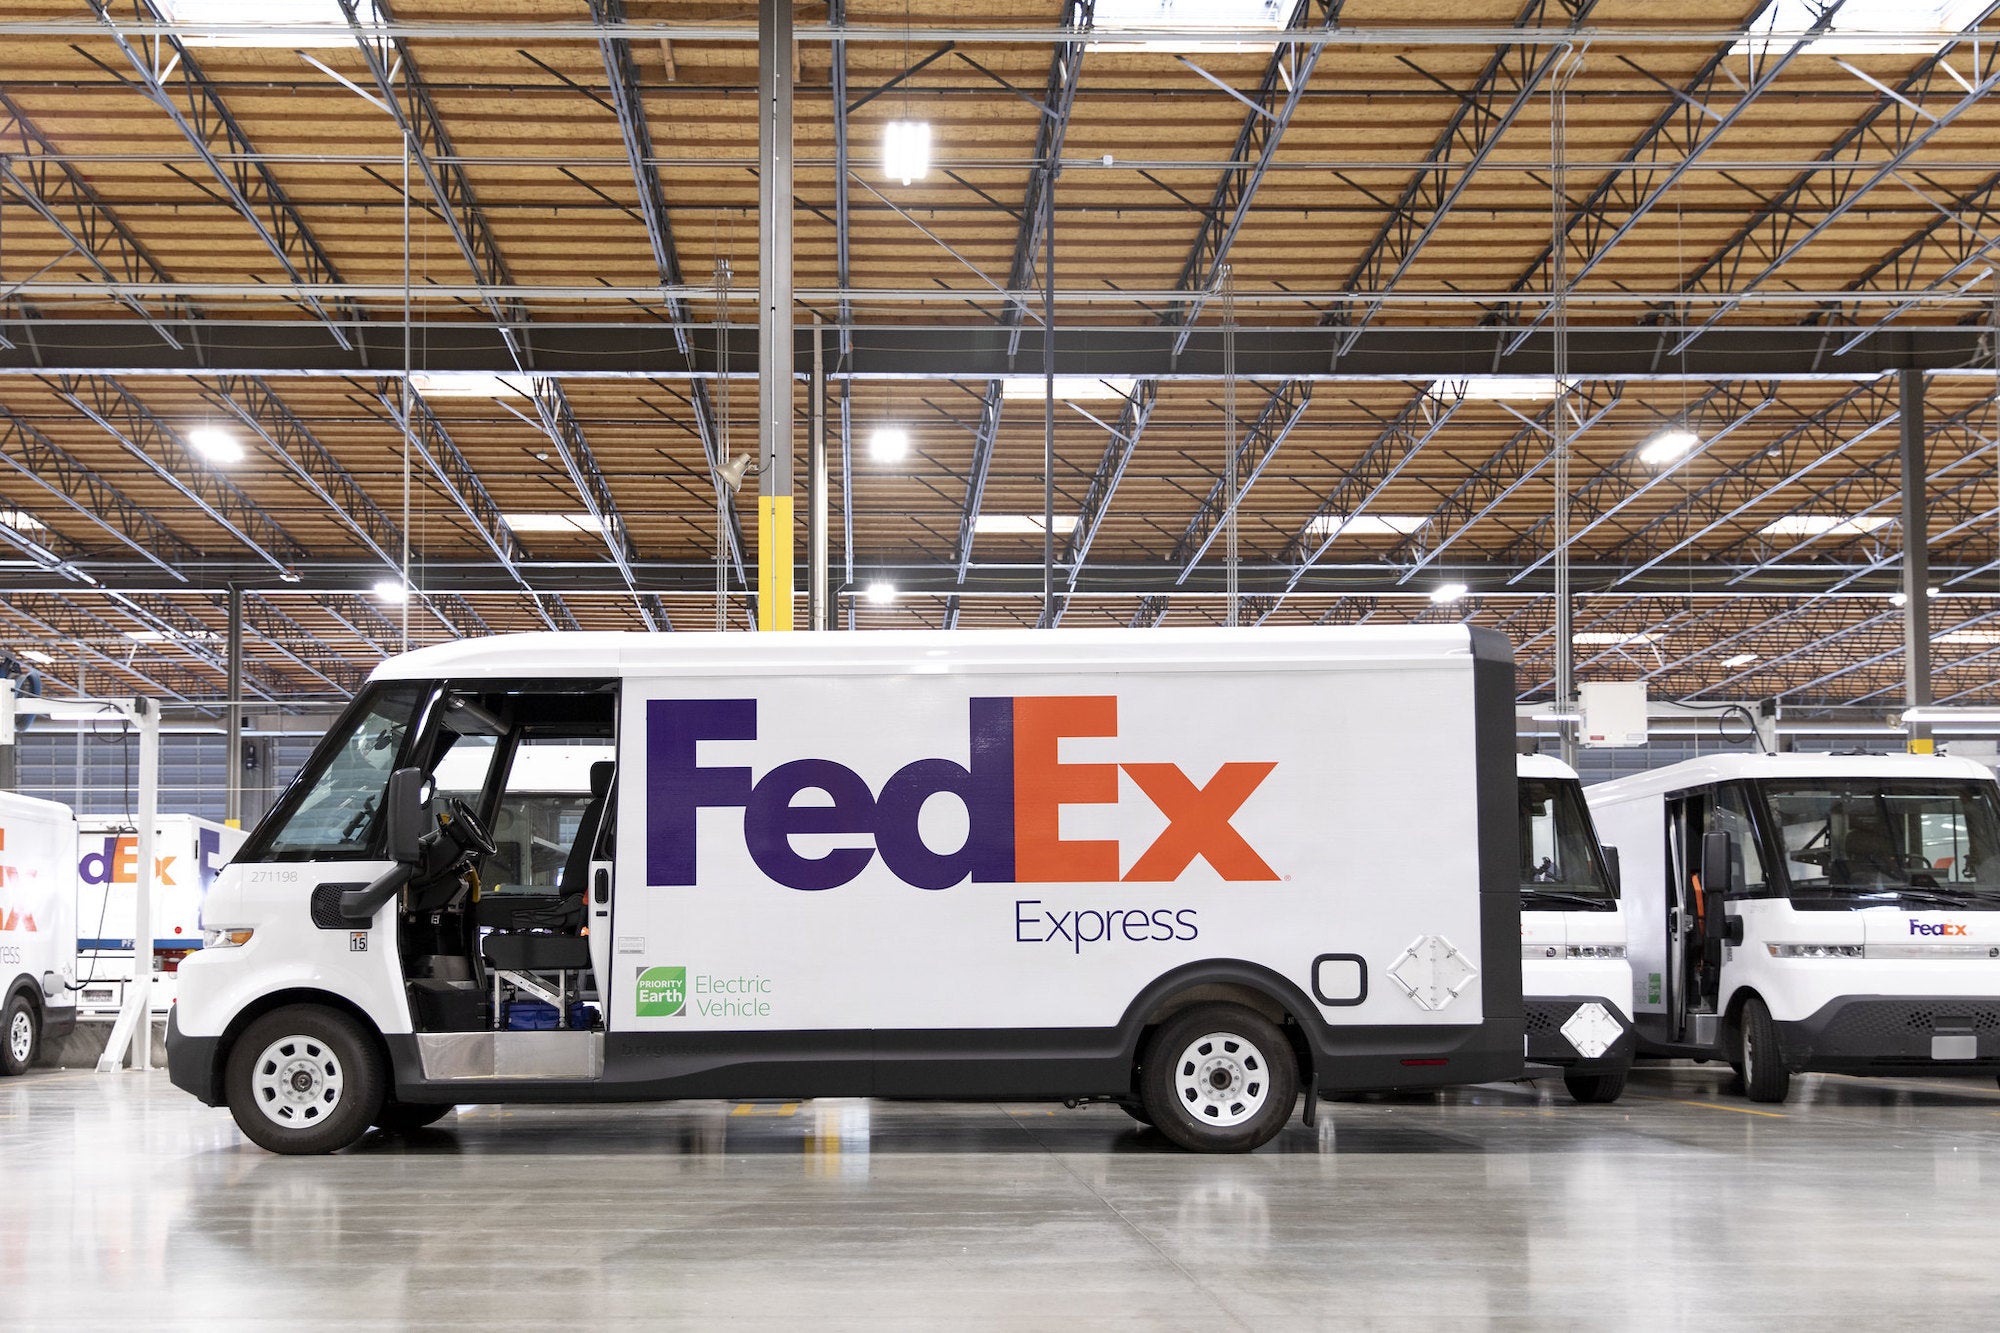 FedEx is charging up its electric vehicle fleet thumbnail